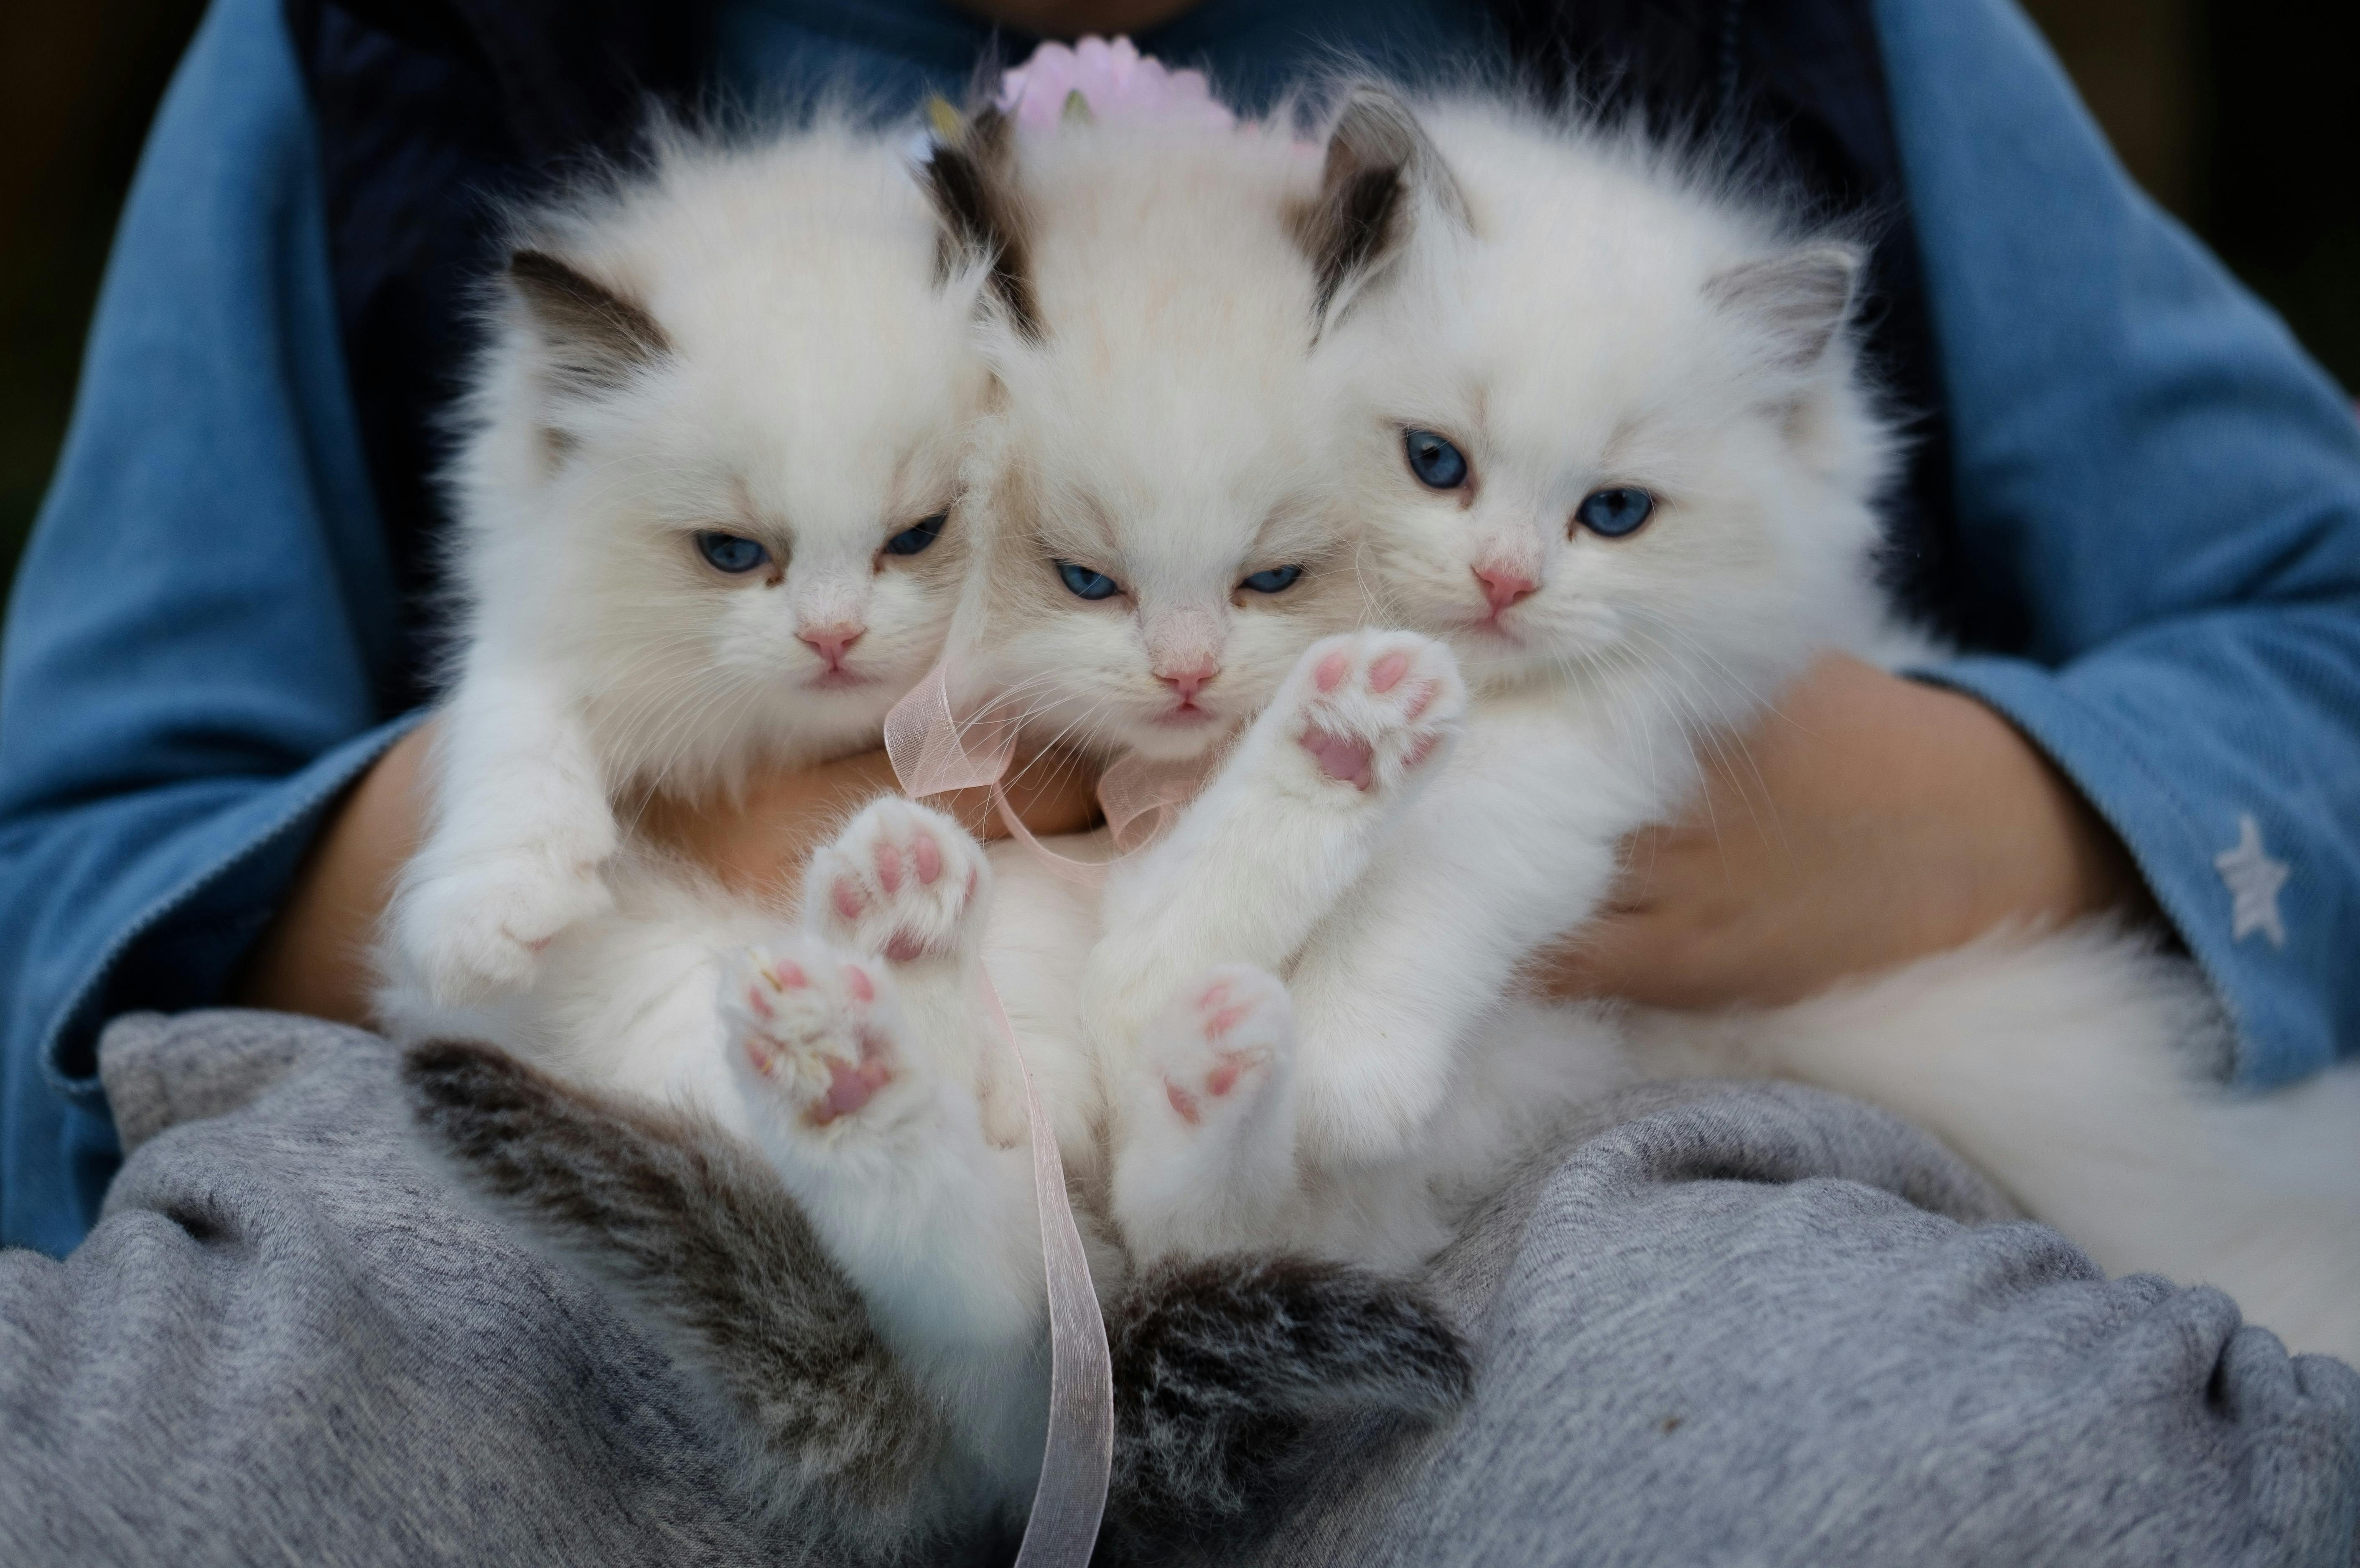 a group of white kittens in a person's lap